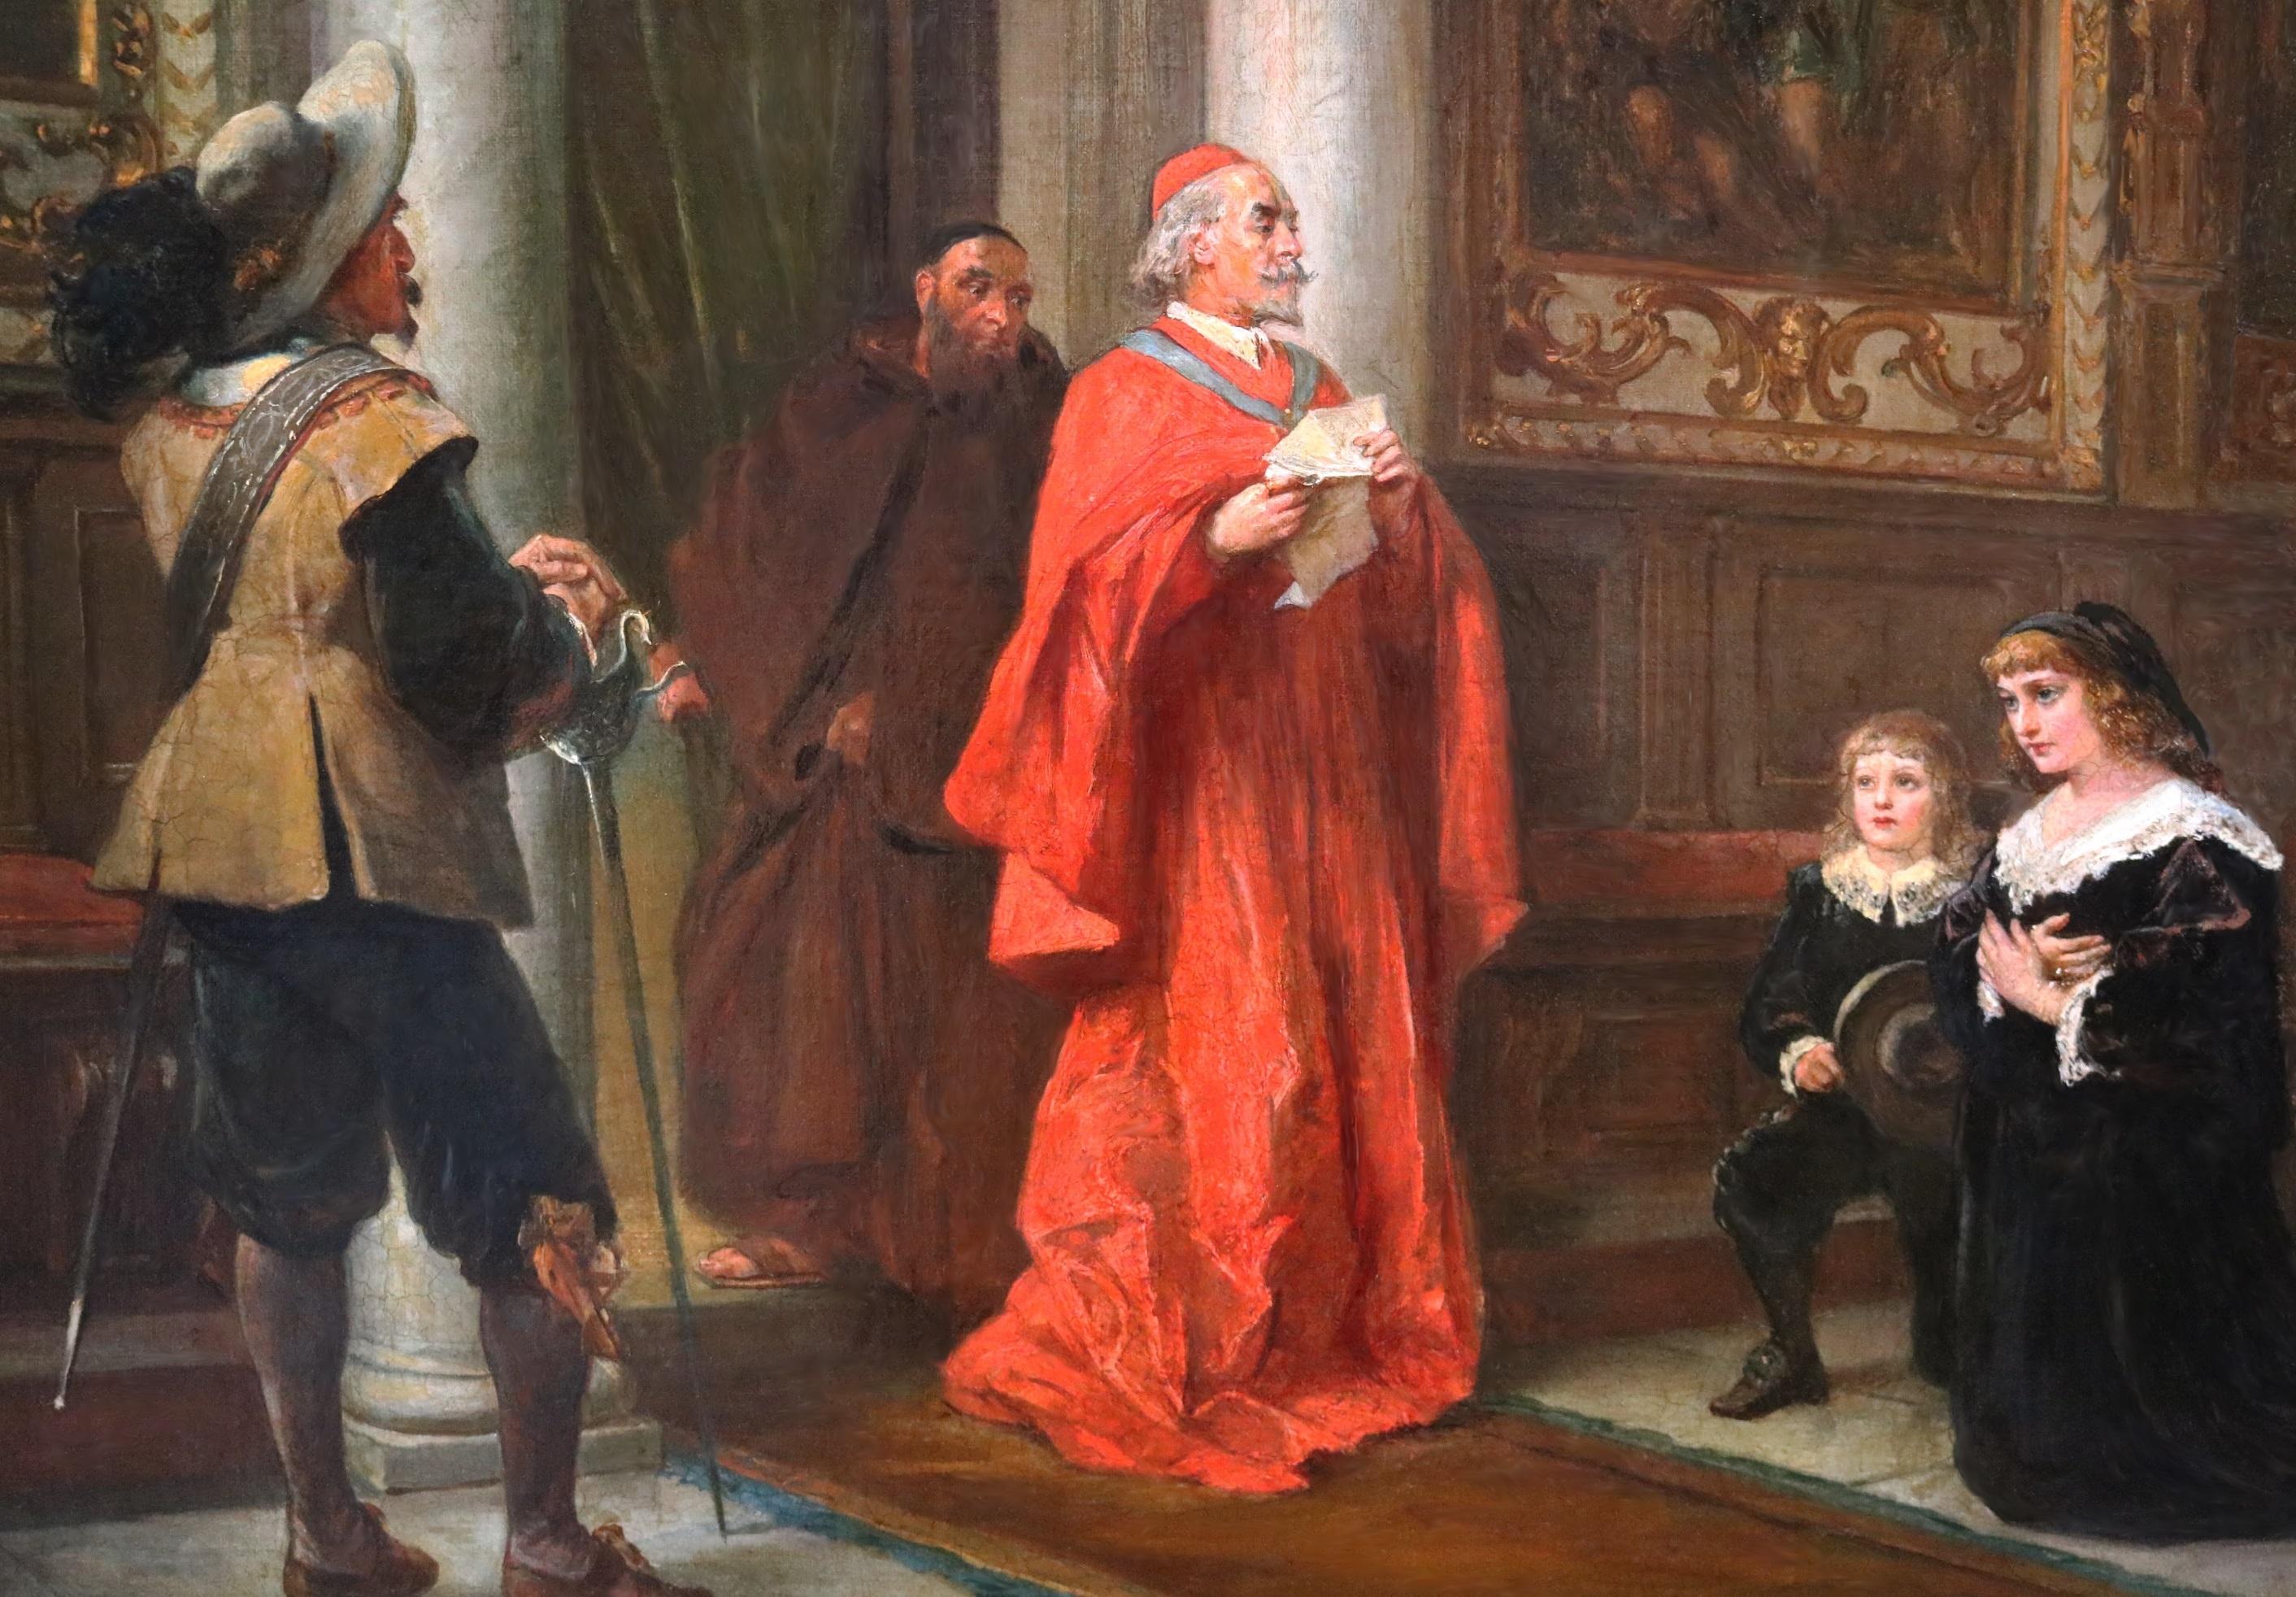 ‘Cardinal Richelieu at the Château de Rueil’ by Robert Alexander Hillingford (1828-1904). The painting – which depicts a scene from Act 3 of Edward Bulwer‐Lytton’s play ‘Richelieu; or The Conspiracy’ – is signed by the artist and presented in a fine